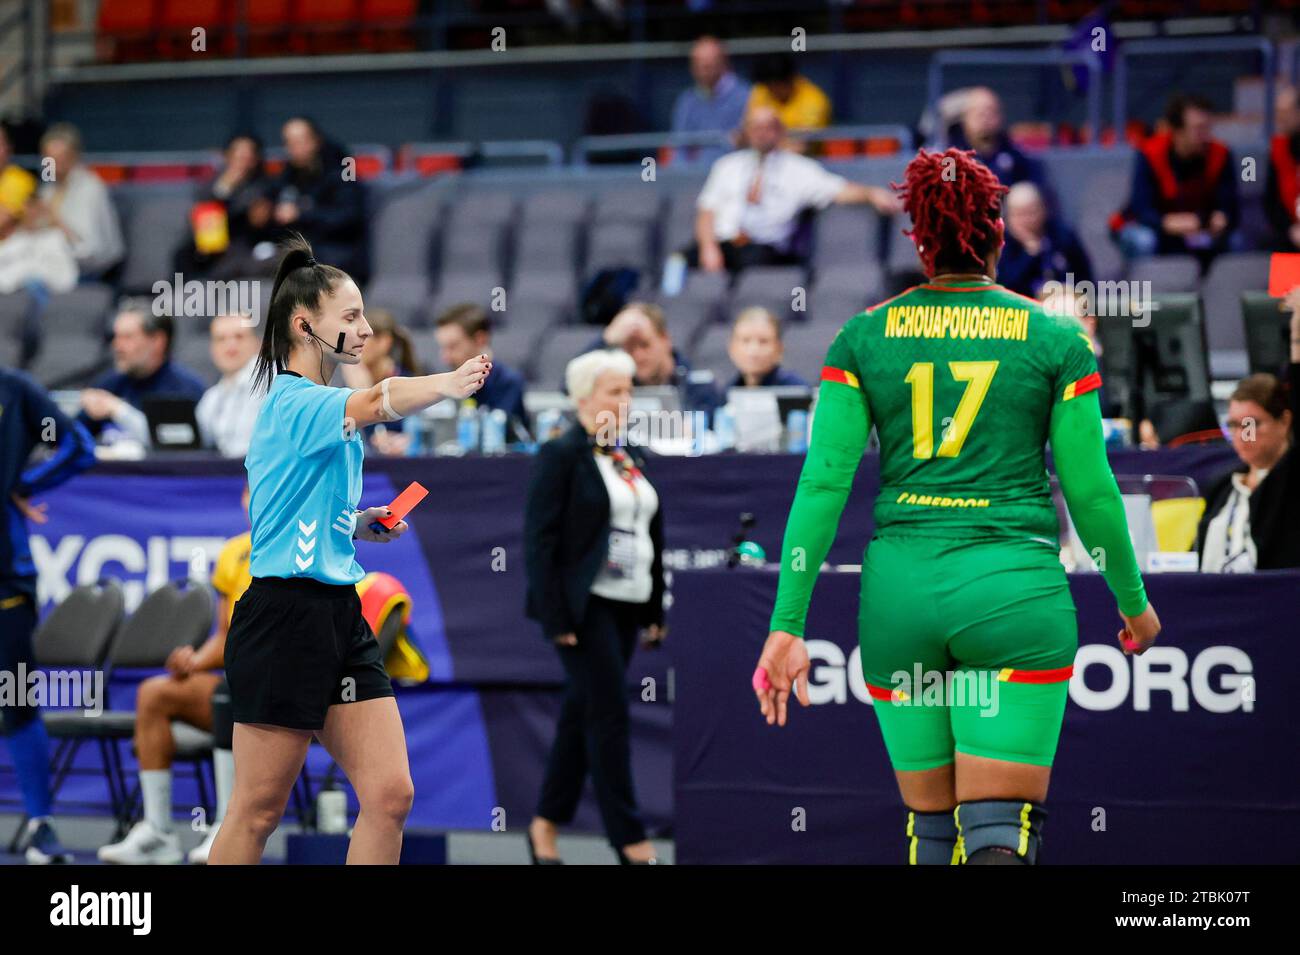 Cameroon's Vanessa Nchouapouognigni Pasma (R) gets a red card from referee Bruna Correa during the IHF Women's World Championship handball match between Sweden and Cameroon at Scandinavium Arena in Gothenburg, Sweden, on Dec. 05, 2023.Photo: Adam Ihse / TT / code 9200 Stock Photo